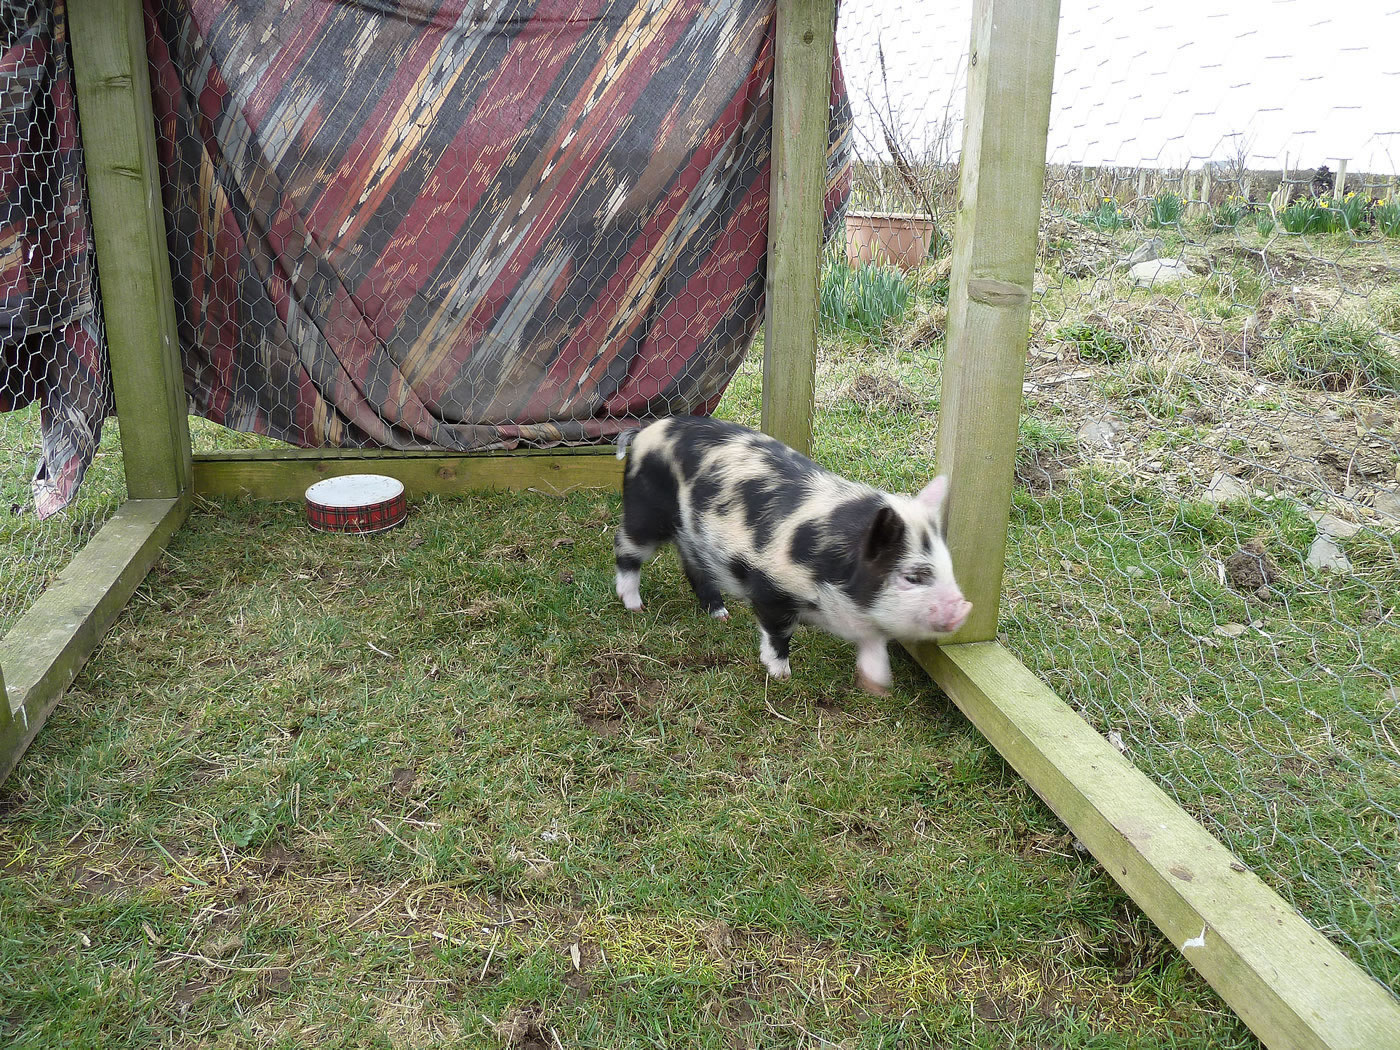 Picture of 5 week old pet pig in his temporary outdoor run during the day